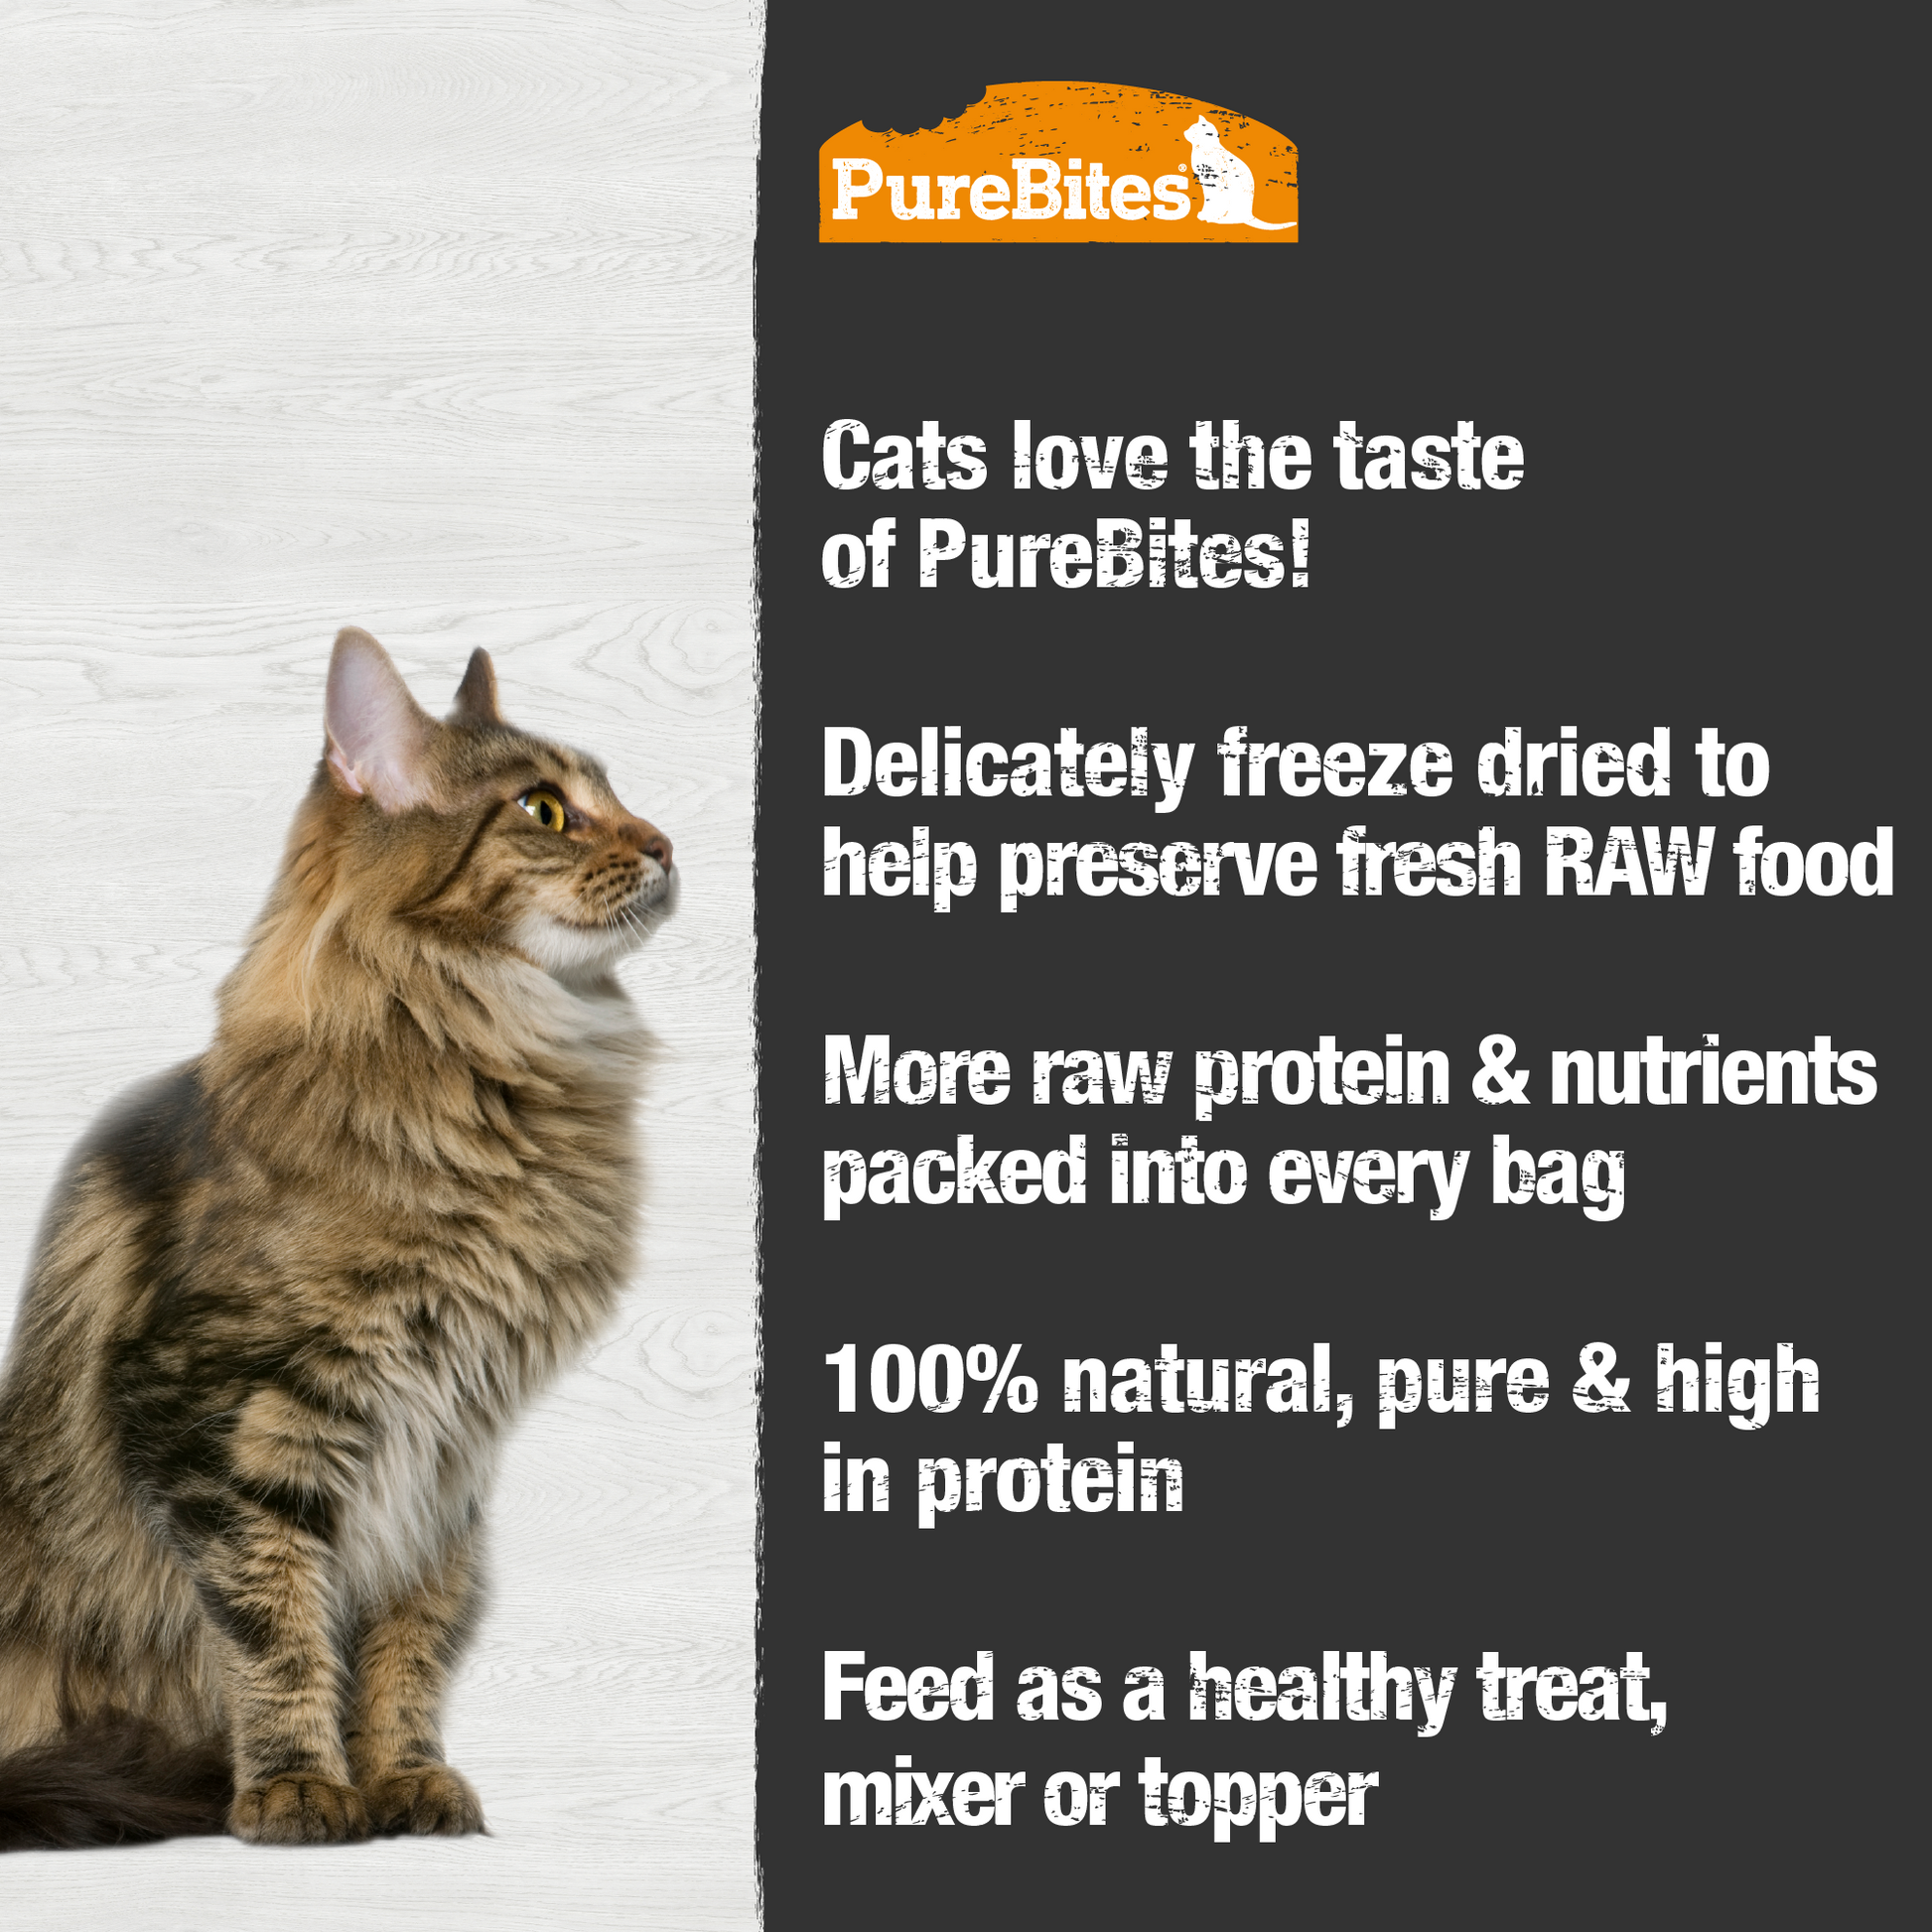 Made fresh & pure means more RAW protein and nutrients packed into every bag. Our duck liver is freeze dried to help preserve its RAW taste, and nutrition, and mirror a cat’s ancestral diet